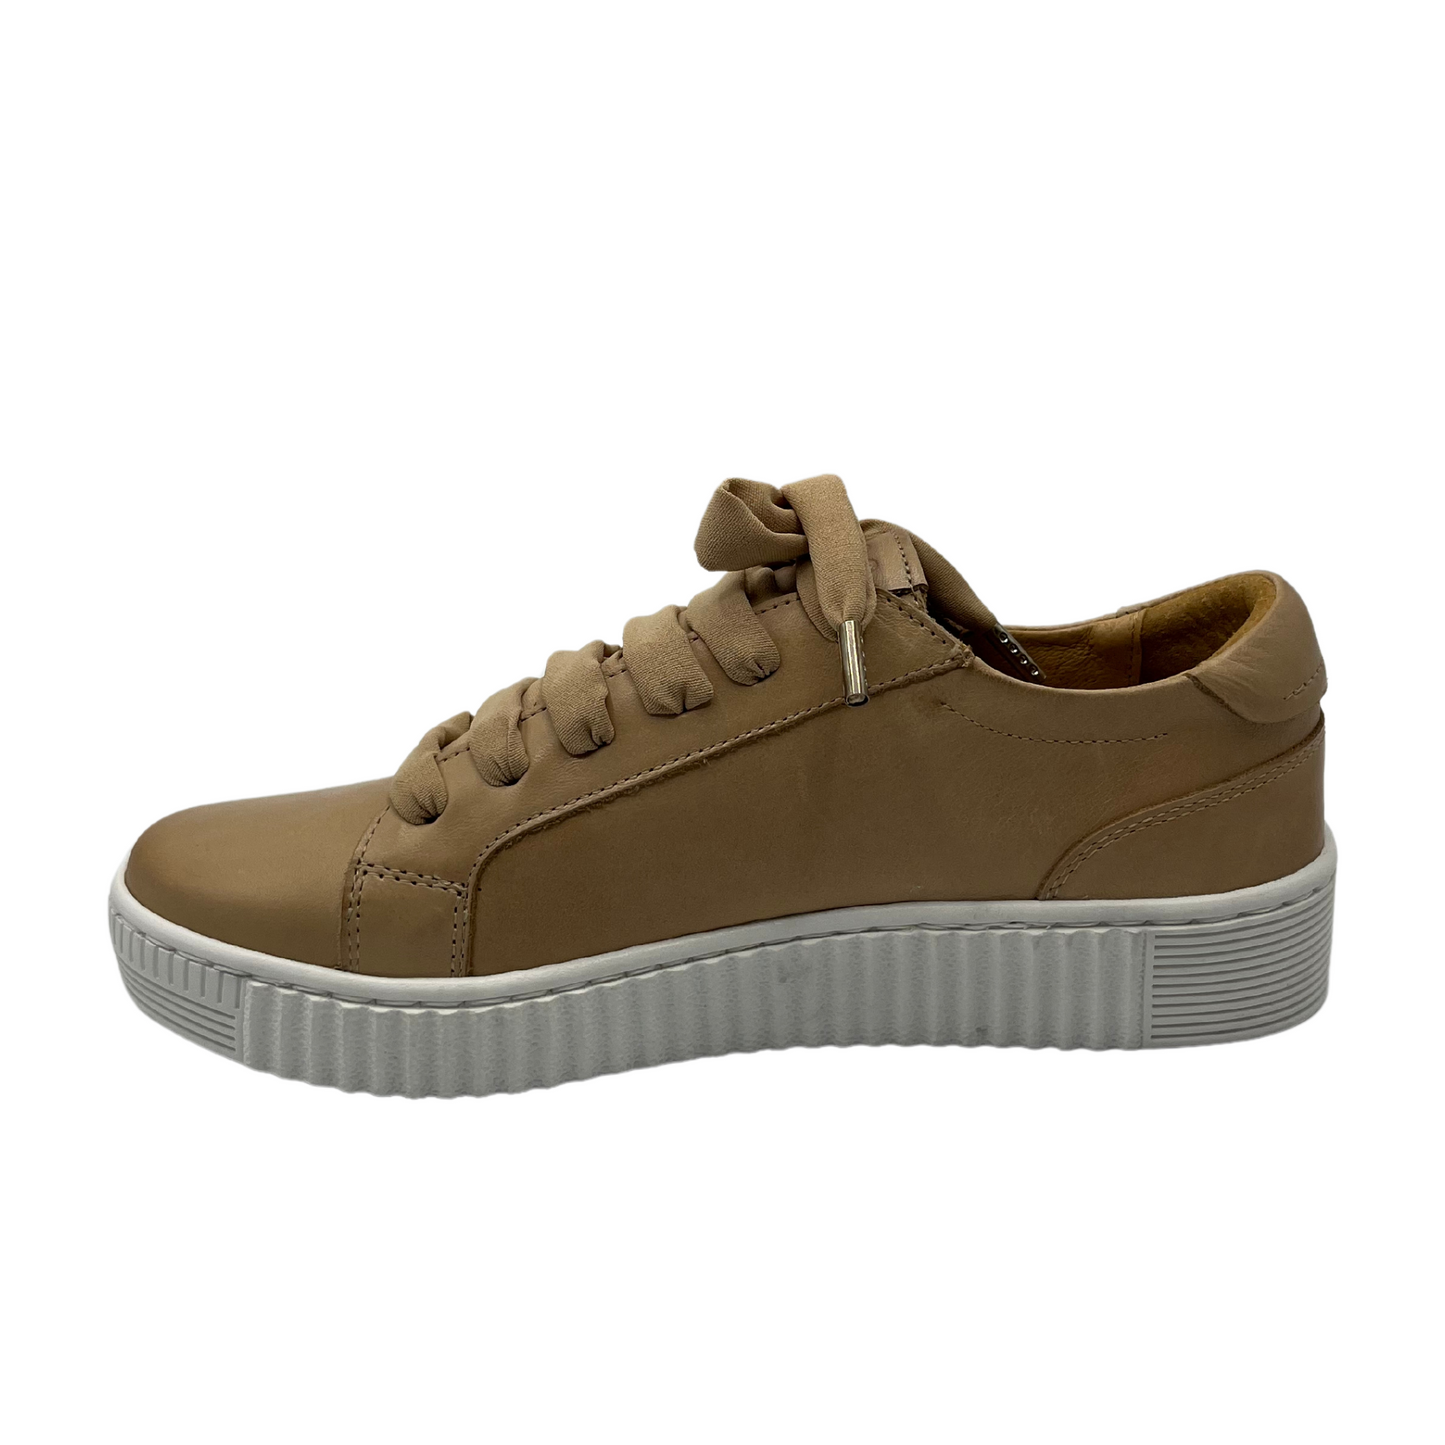 Left facing view of nude leather sneaker with white rubber outsole